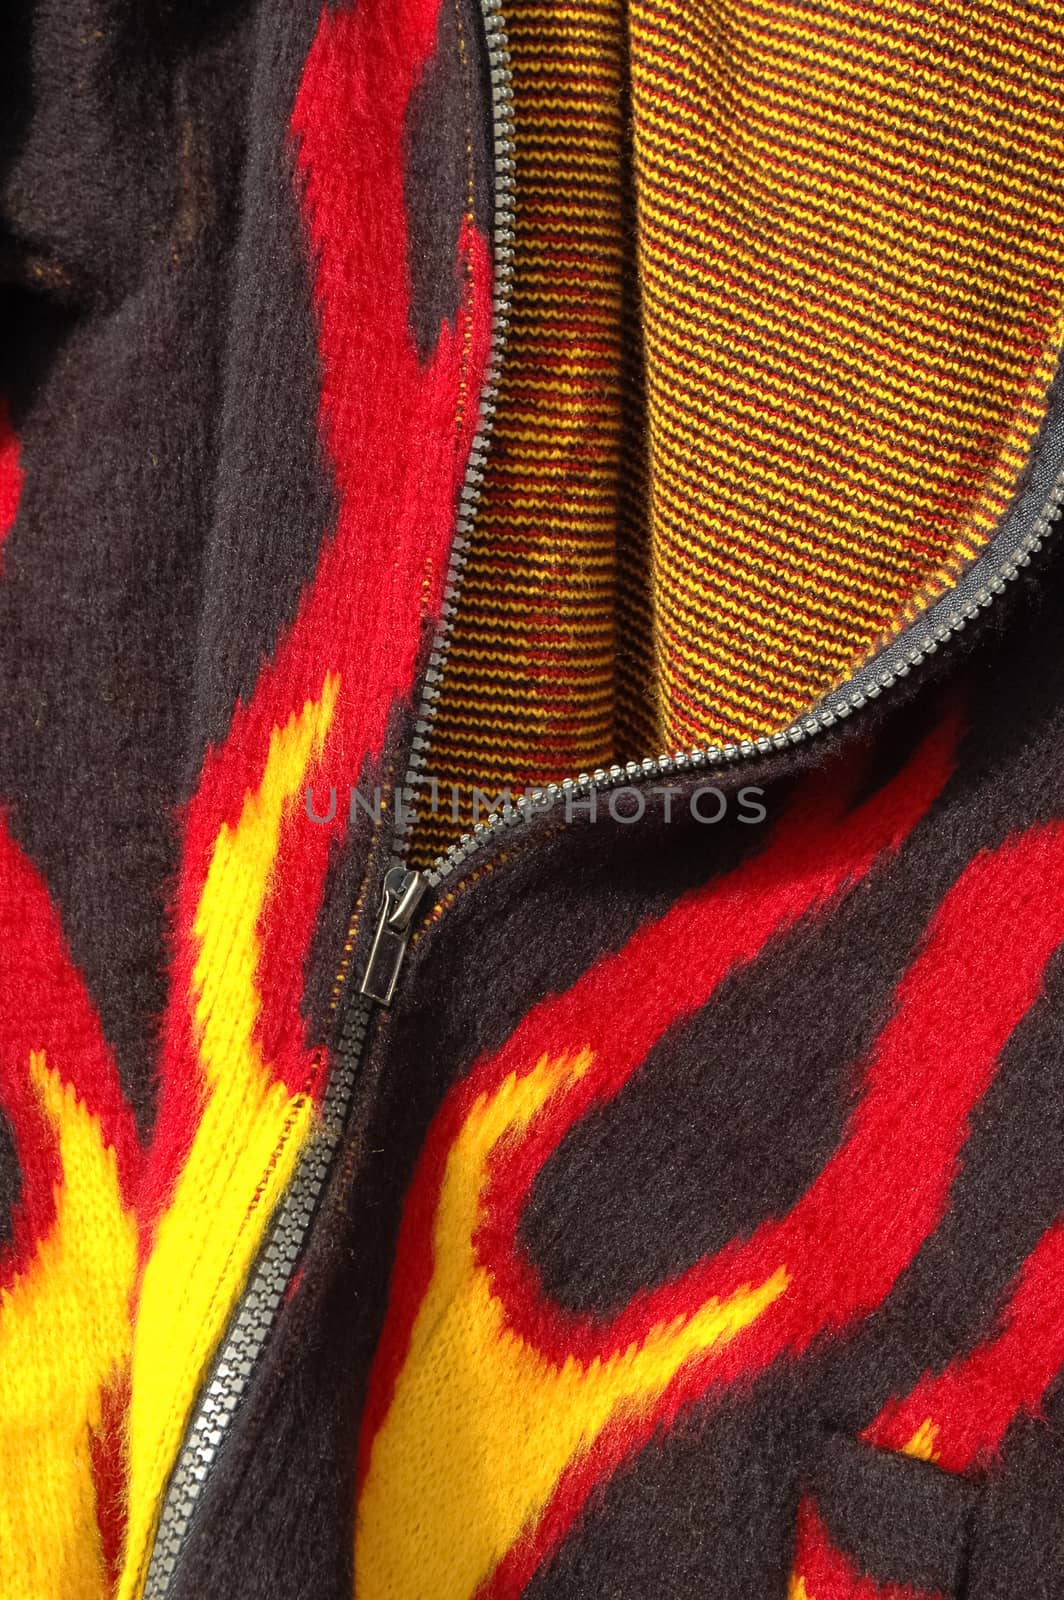 flame print clothing close-up